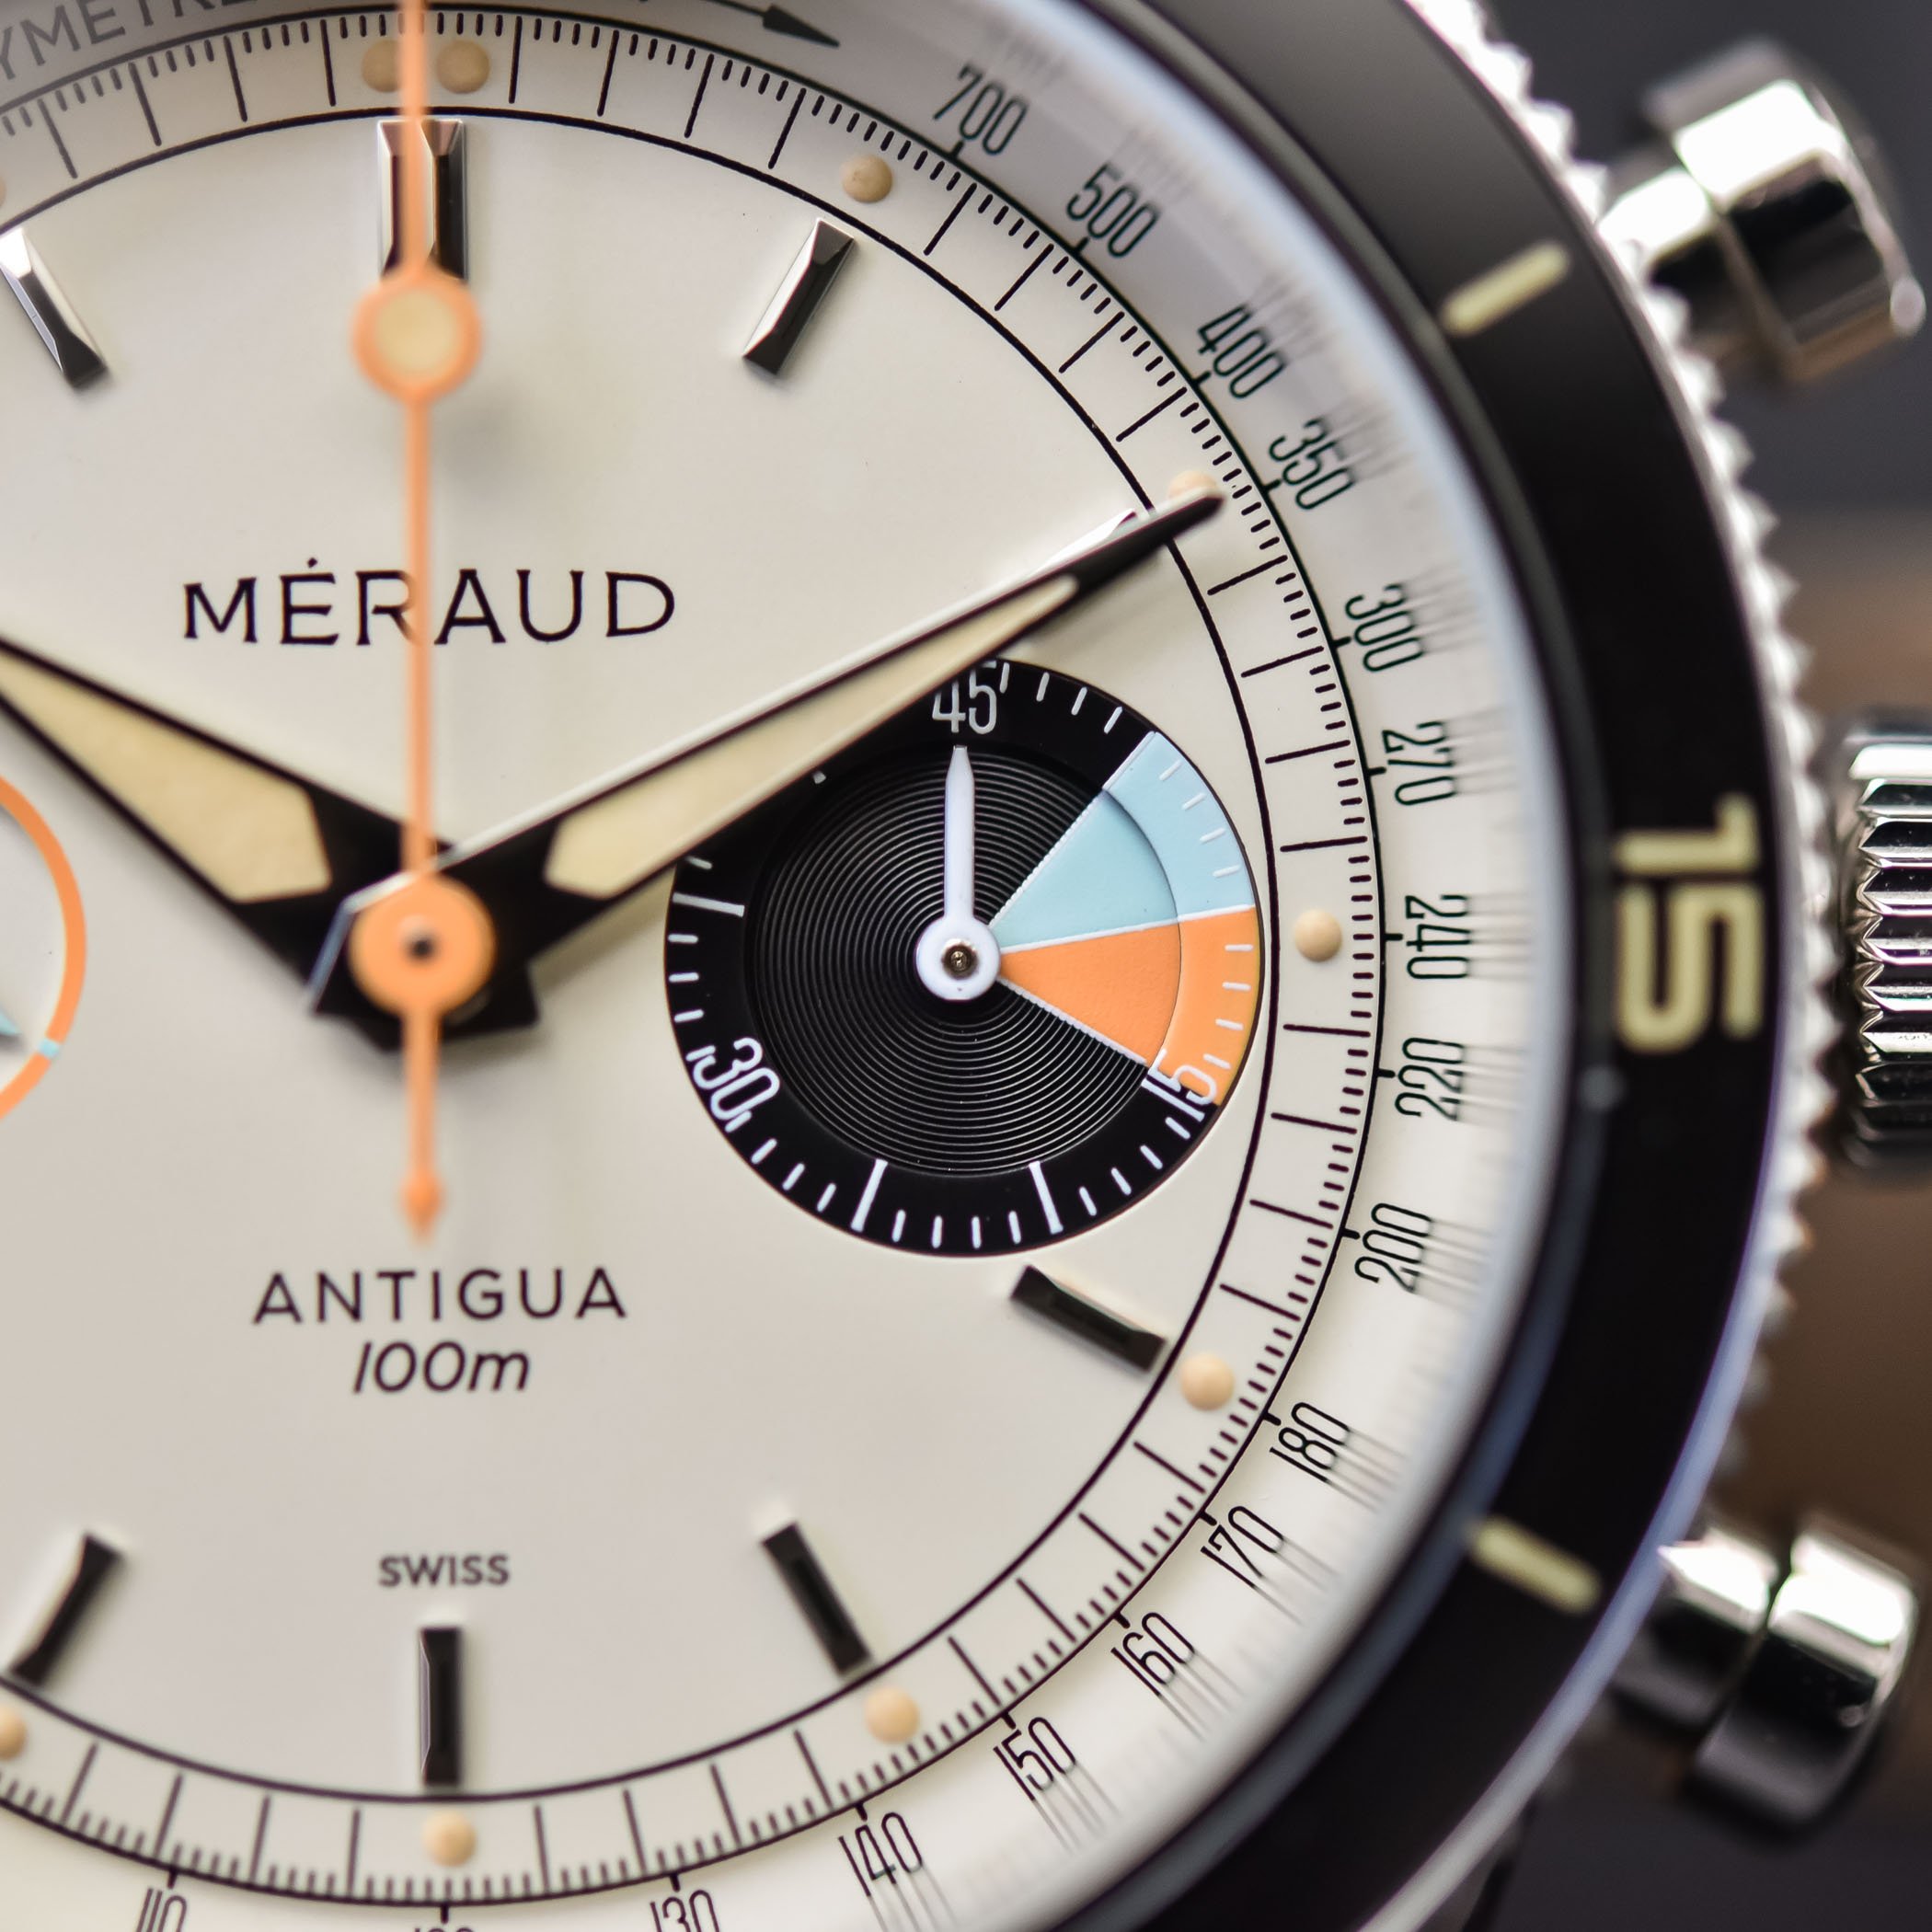 Meraud Antigua Chronograph with New Old Stock Landeron 248 Movement Restored - hands-on review - 10